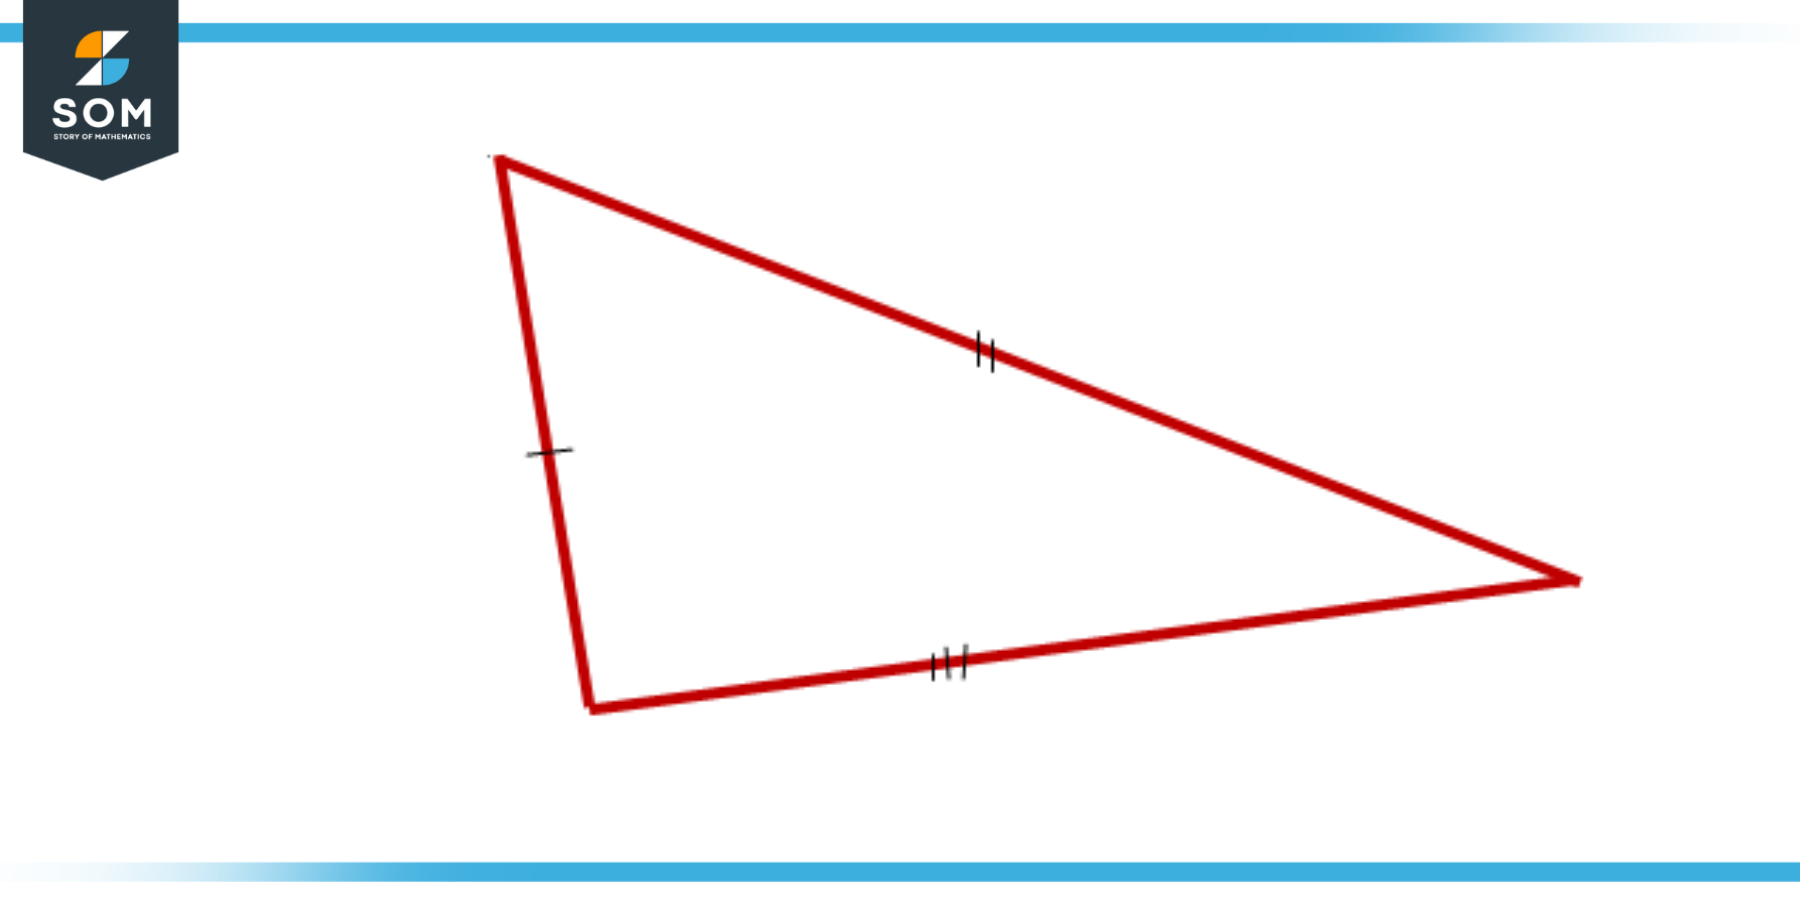 scalene right triangle in real life